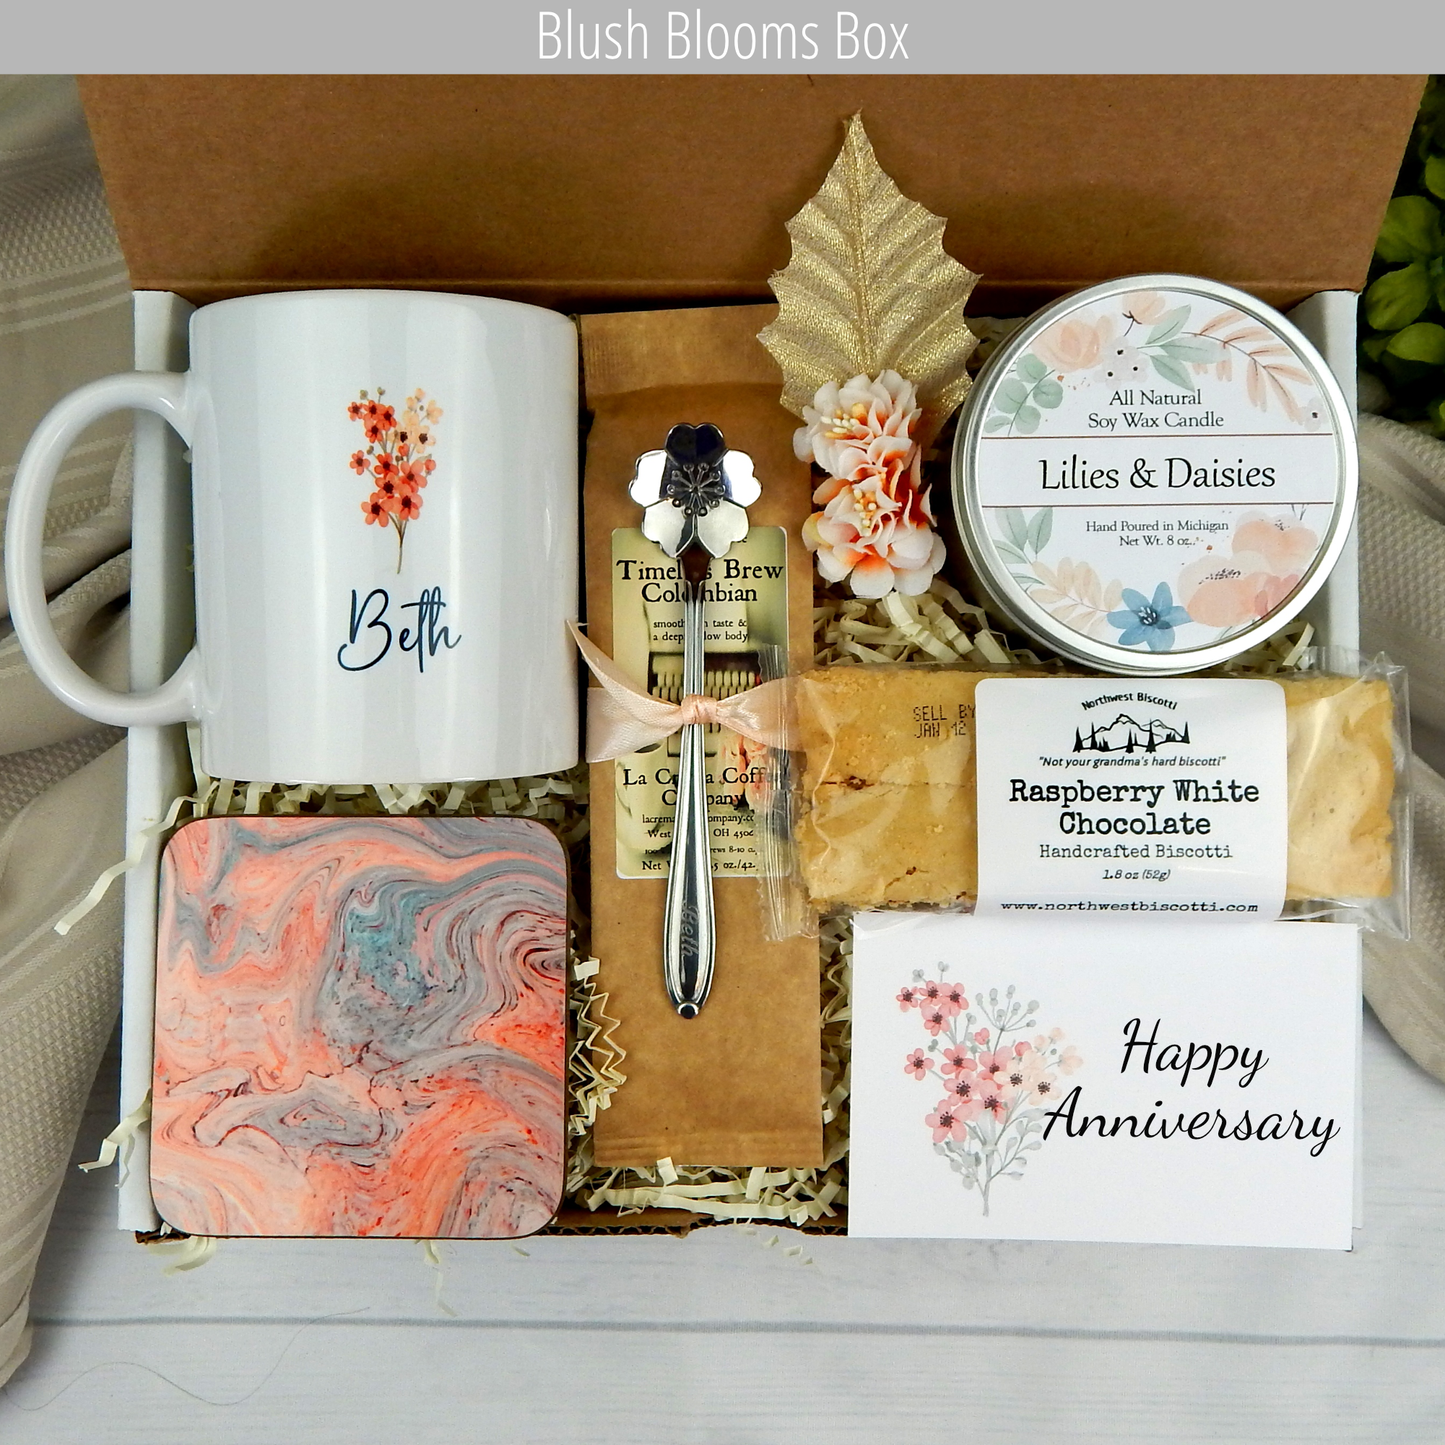 Celebrating her commitment: Women's employee anniversary gift basket with personalized mug, coffee, and delightful goodies.